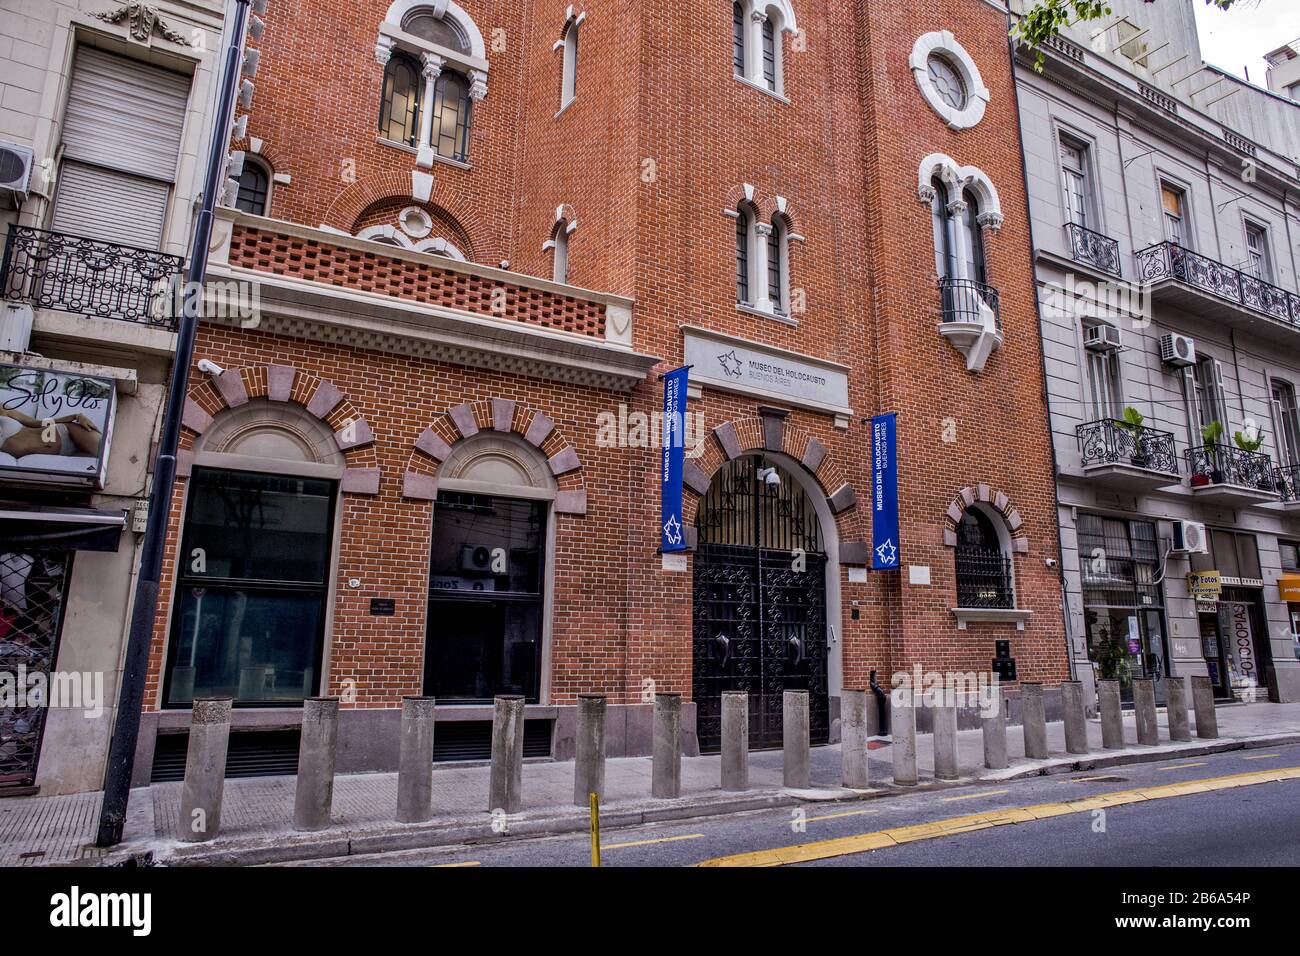 Buenos Aires, Federal Capital, Argentina. 10th Mar, 2020. The Holocaust Museum in Buenos Aires City, through objects, images and words tells the life of the Jews in Argentina and in Europe, before and during the Second World War. Credit: Roberto Almeida Aveledo/ZUMA Wire/Alamy Live News Stock Photo